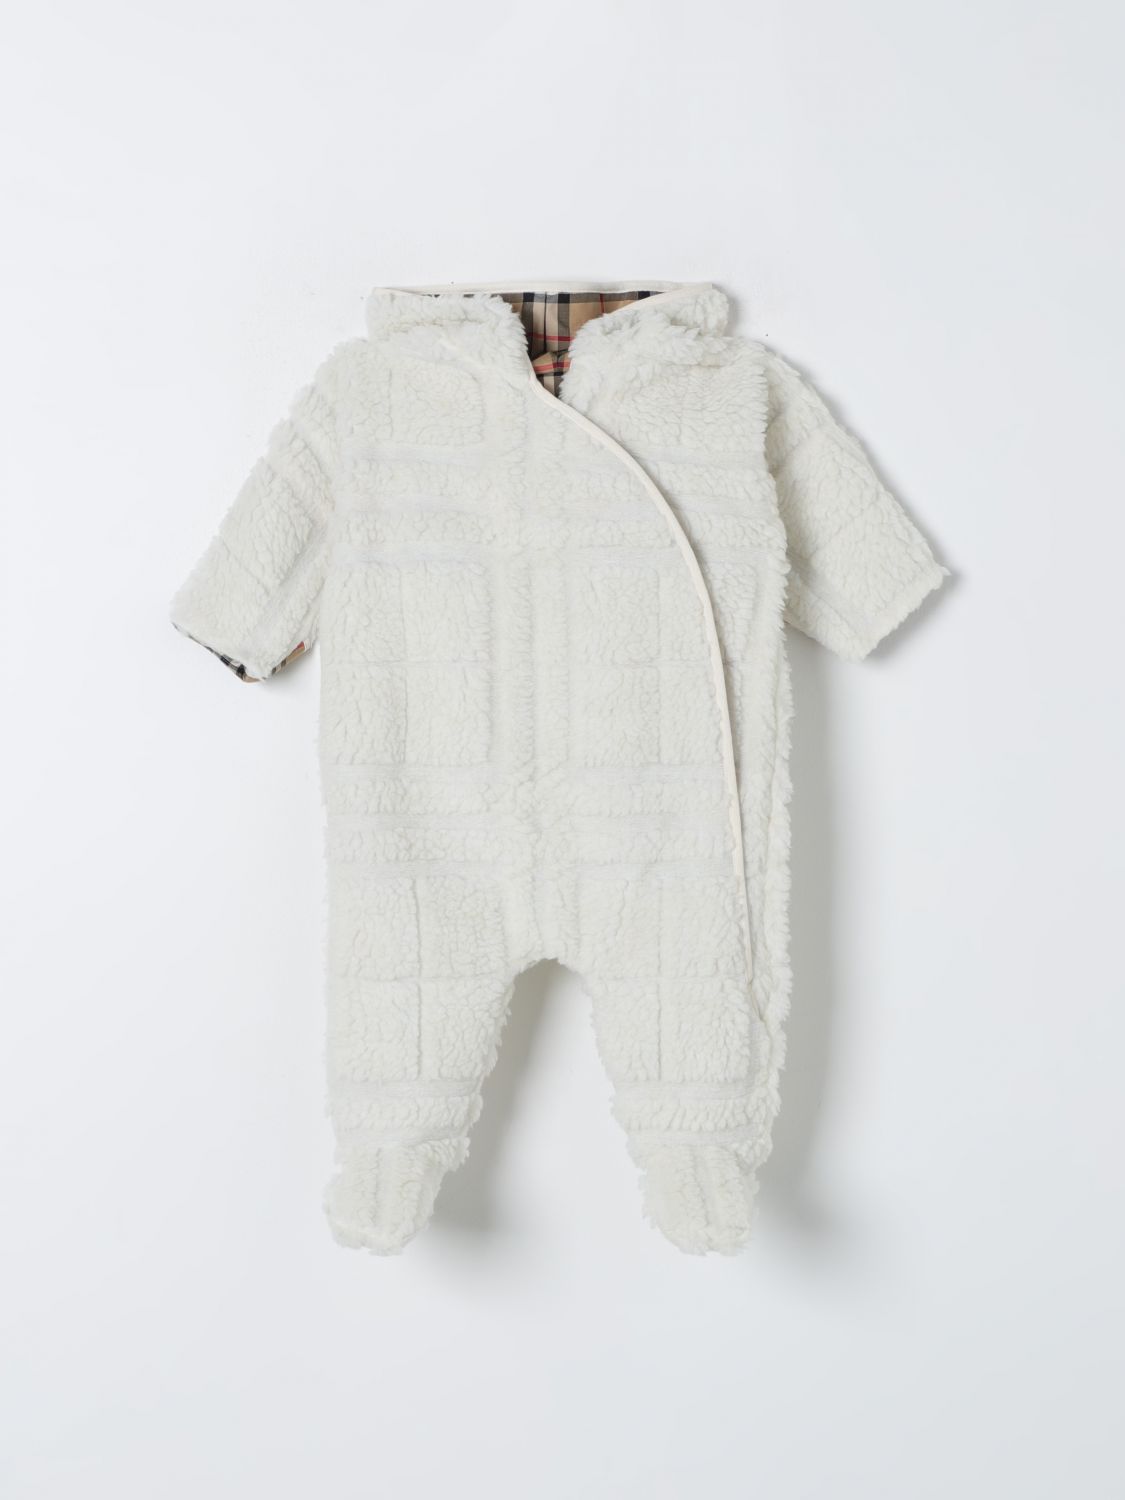 Burberry Babies' Tracksuits  Kids Kids Color White